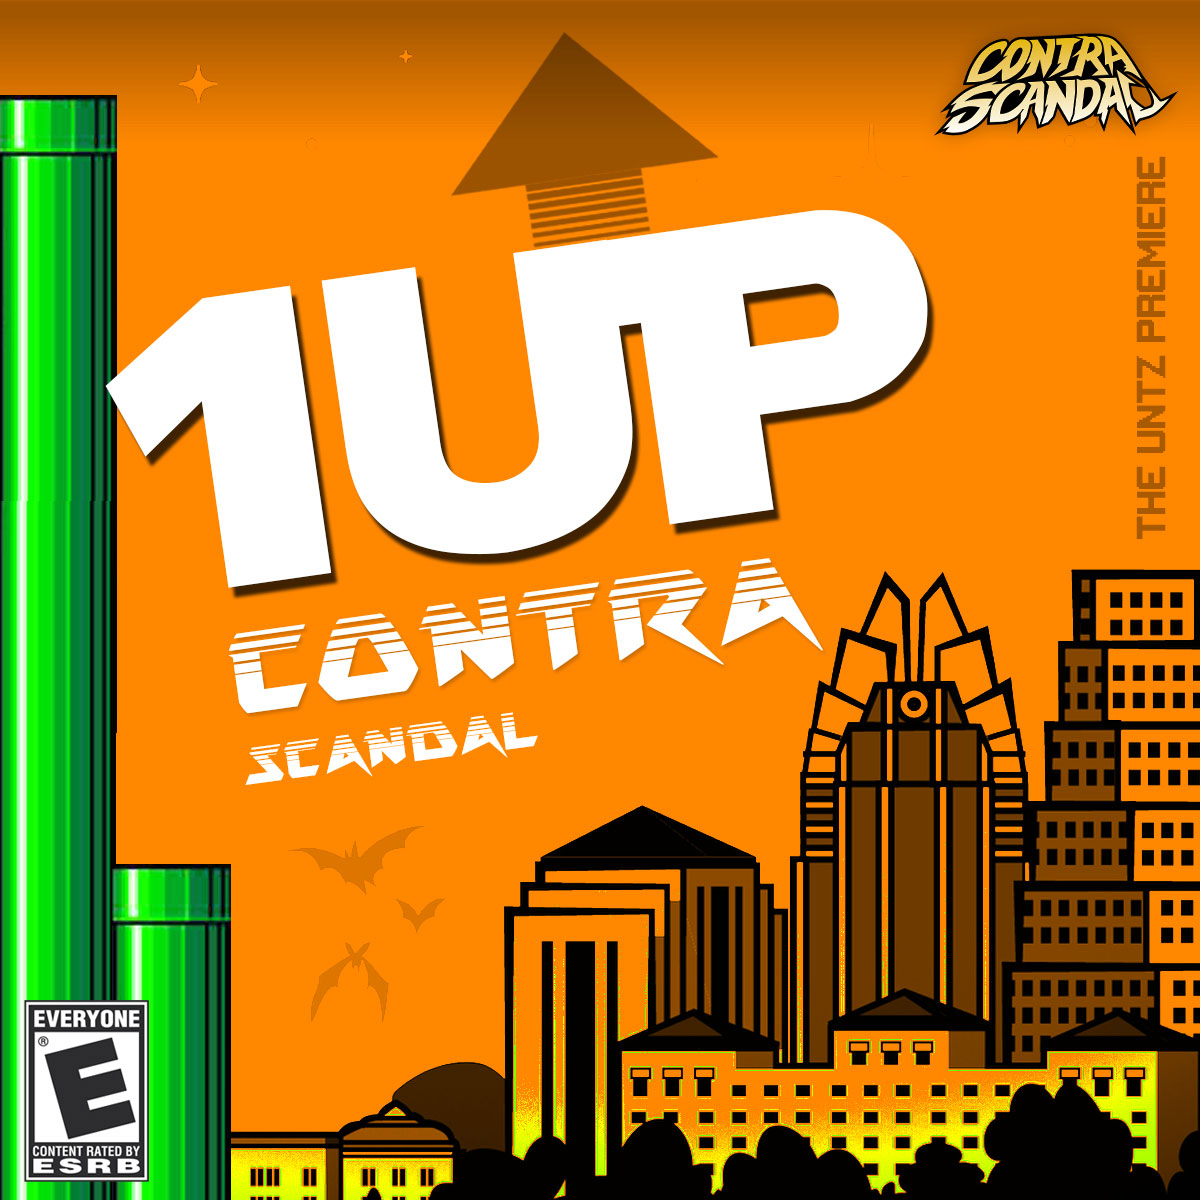 Contra Scandal